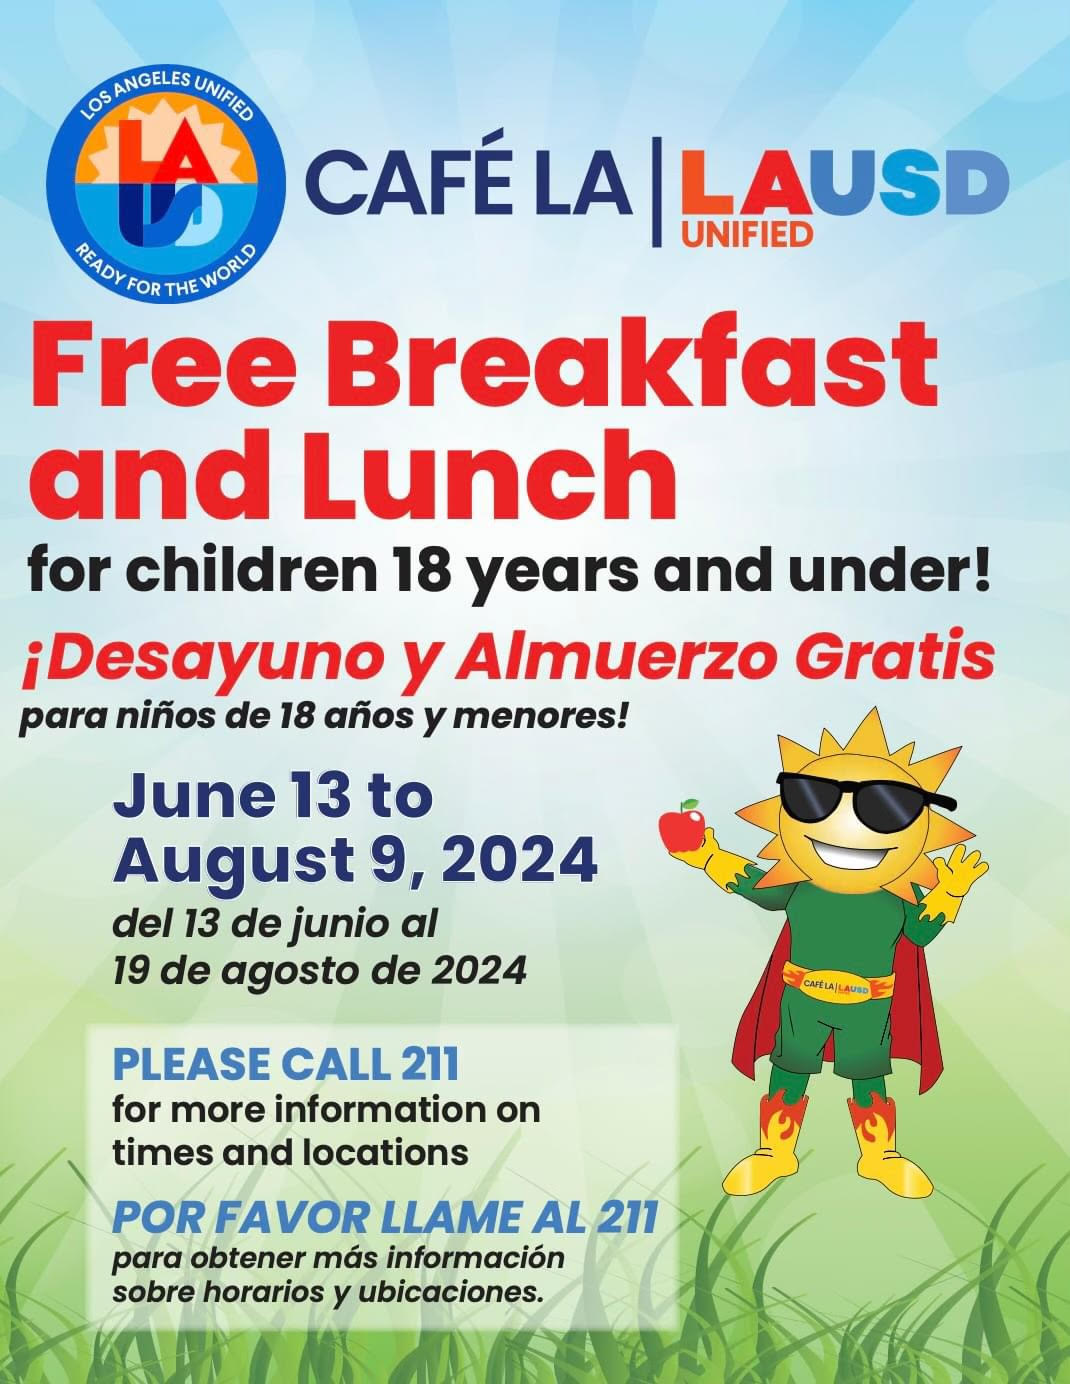 Free Breakfast and Lunch for Kids under 18 June 13 - Aug 9, 2024